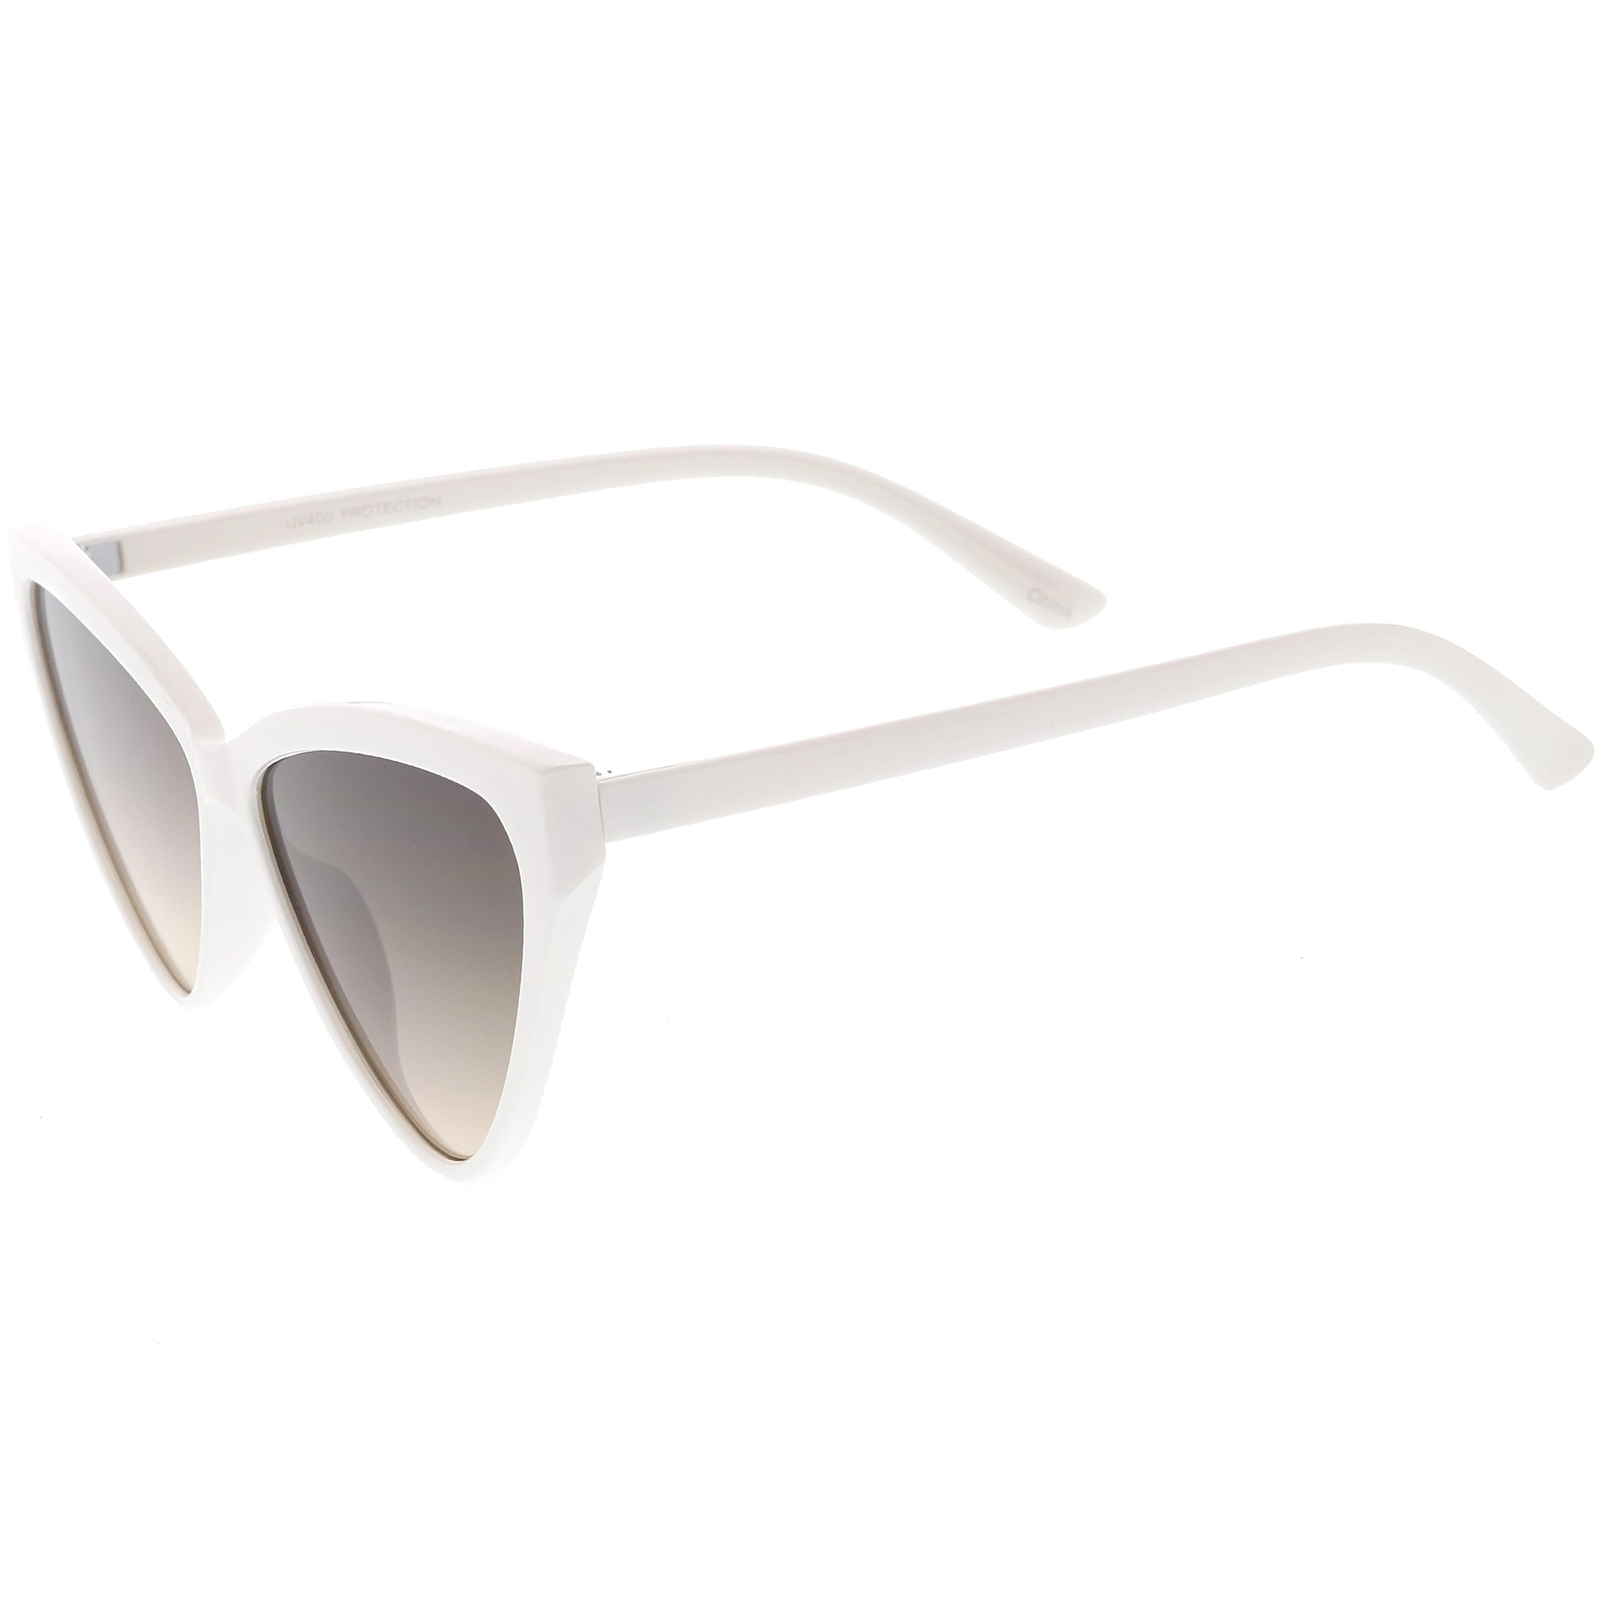 Oversize Vintage Cat Eye Sunglasses Color Tinted Lens 59mm (White / Smoke Gradient) - image 3 of 4